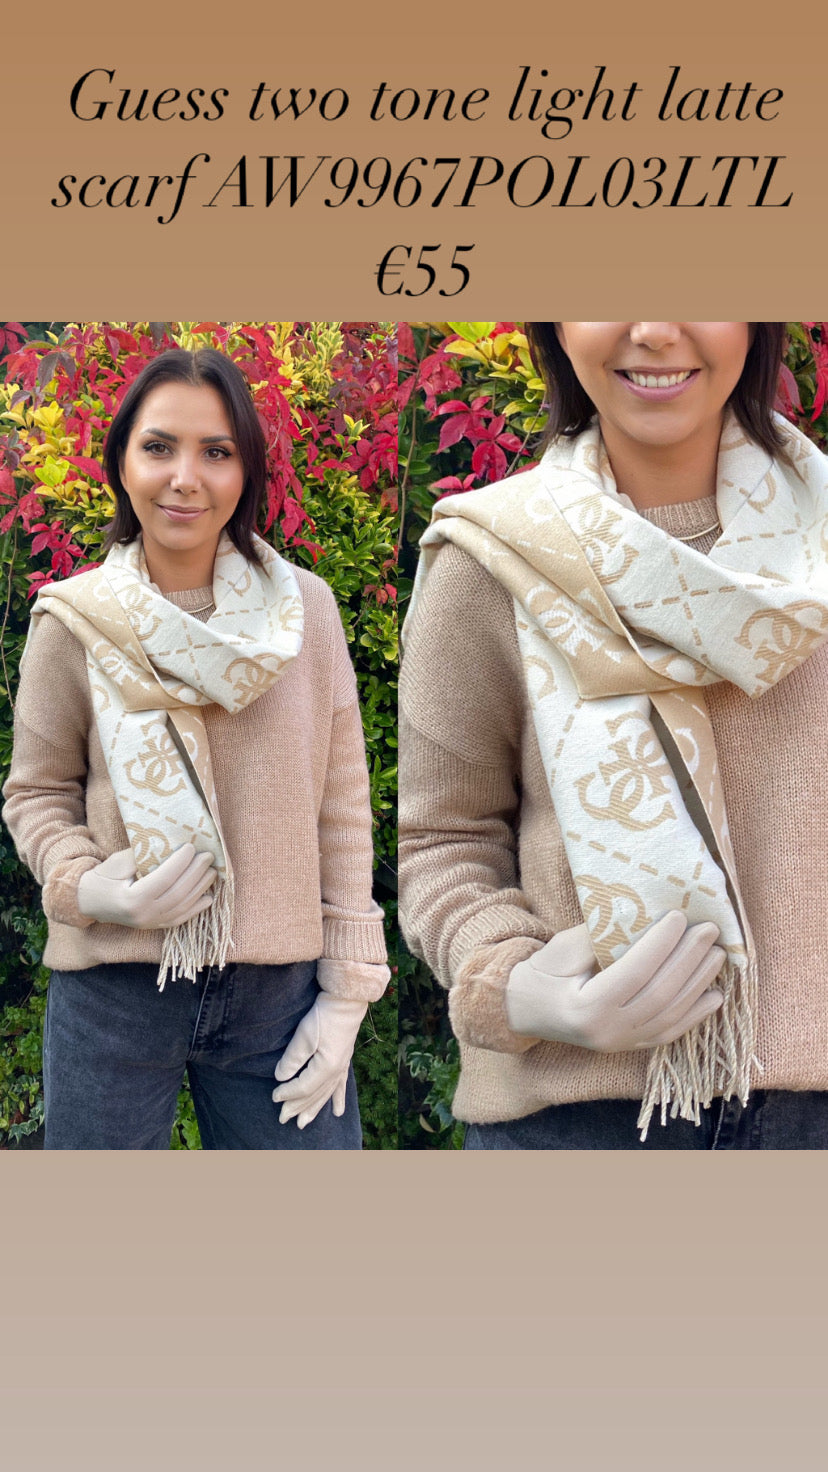 Guess two tone light latte scarf